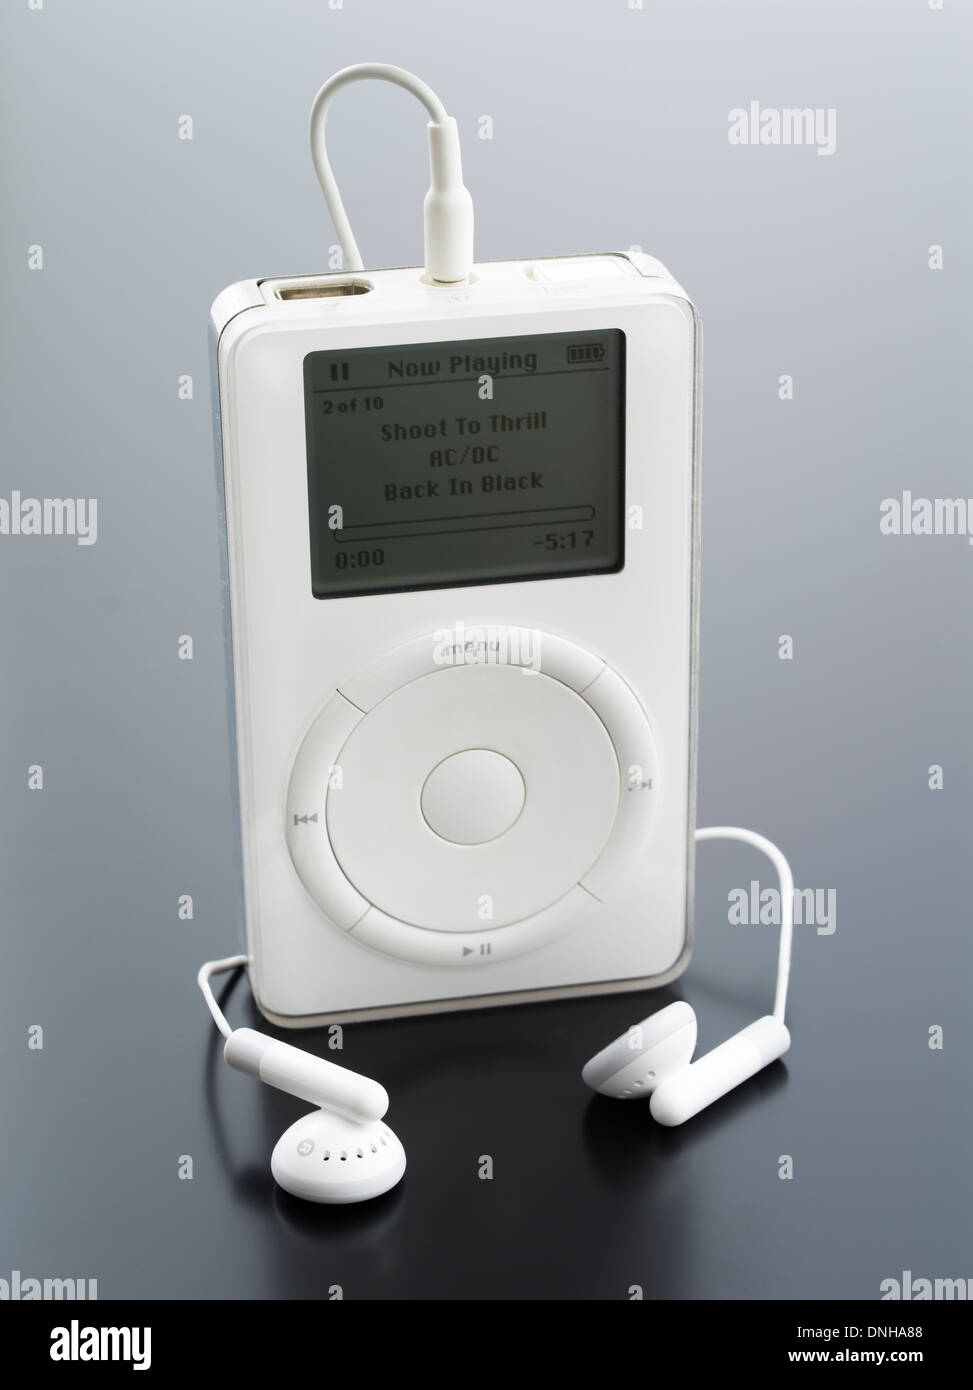 Apple iPod 1st generation released October 23, 2001 with buds earphones in white   iconic portable music device Stock Photo